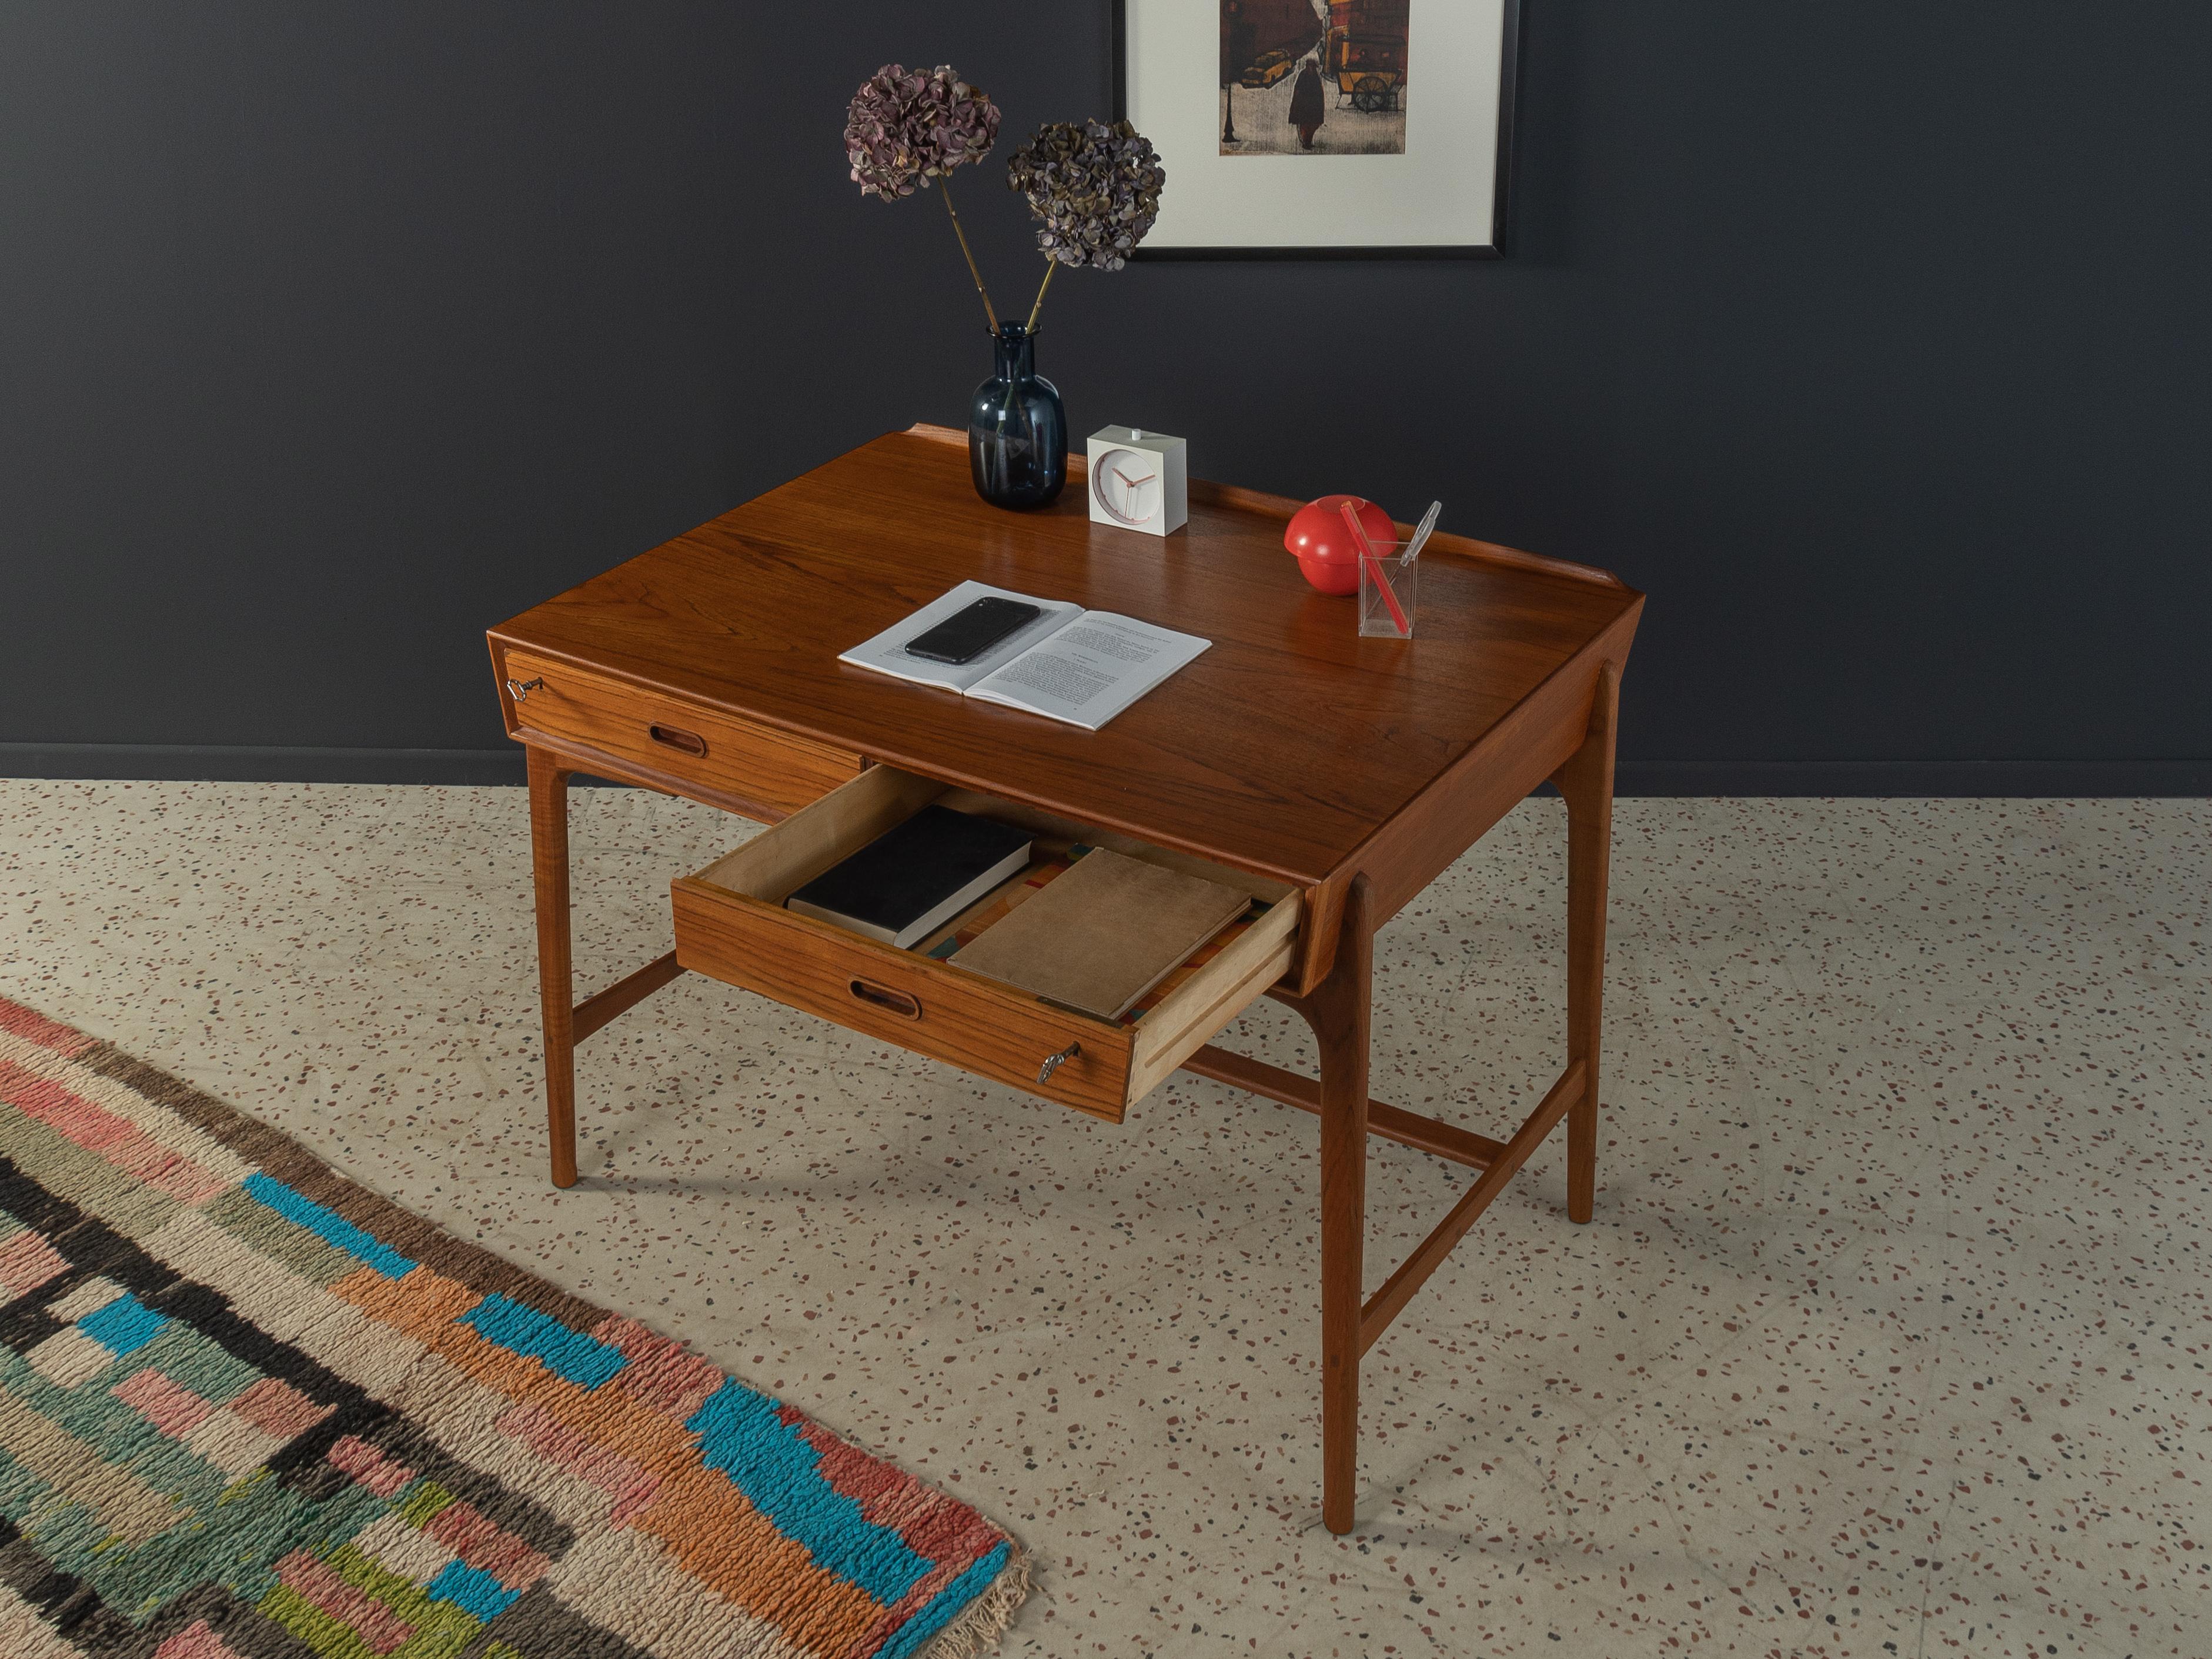 Classic freestanding desk by Svend Aage Madsen for Sigurd Hansen from 1958. Corpus in teak veneer with two drawers and long legs.

Quality Features:
 accomplished design: perfect proportions and visible attention to detail
 high quality